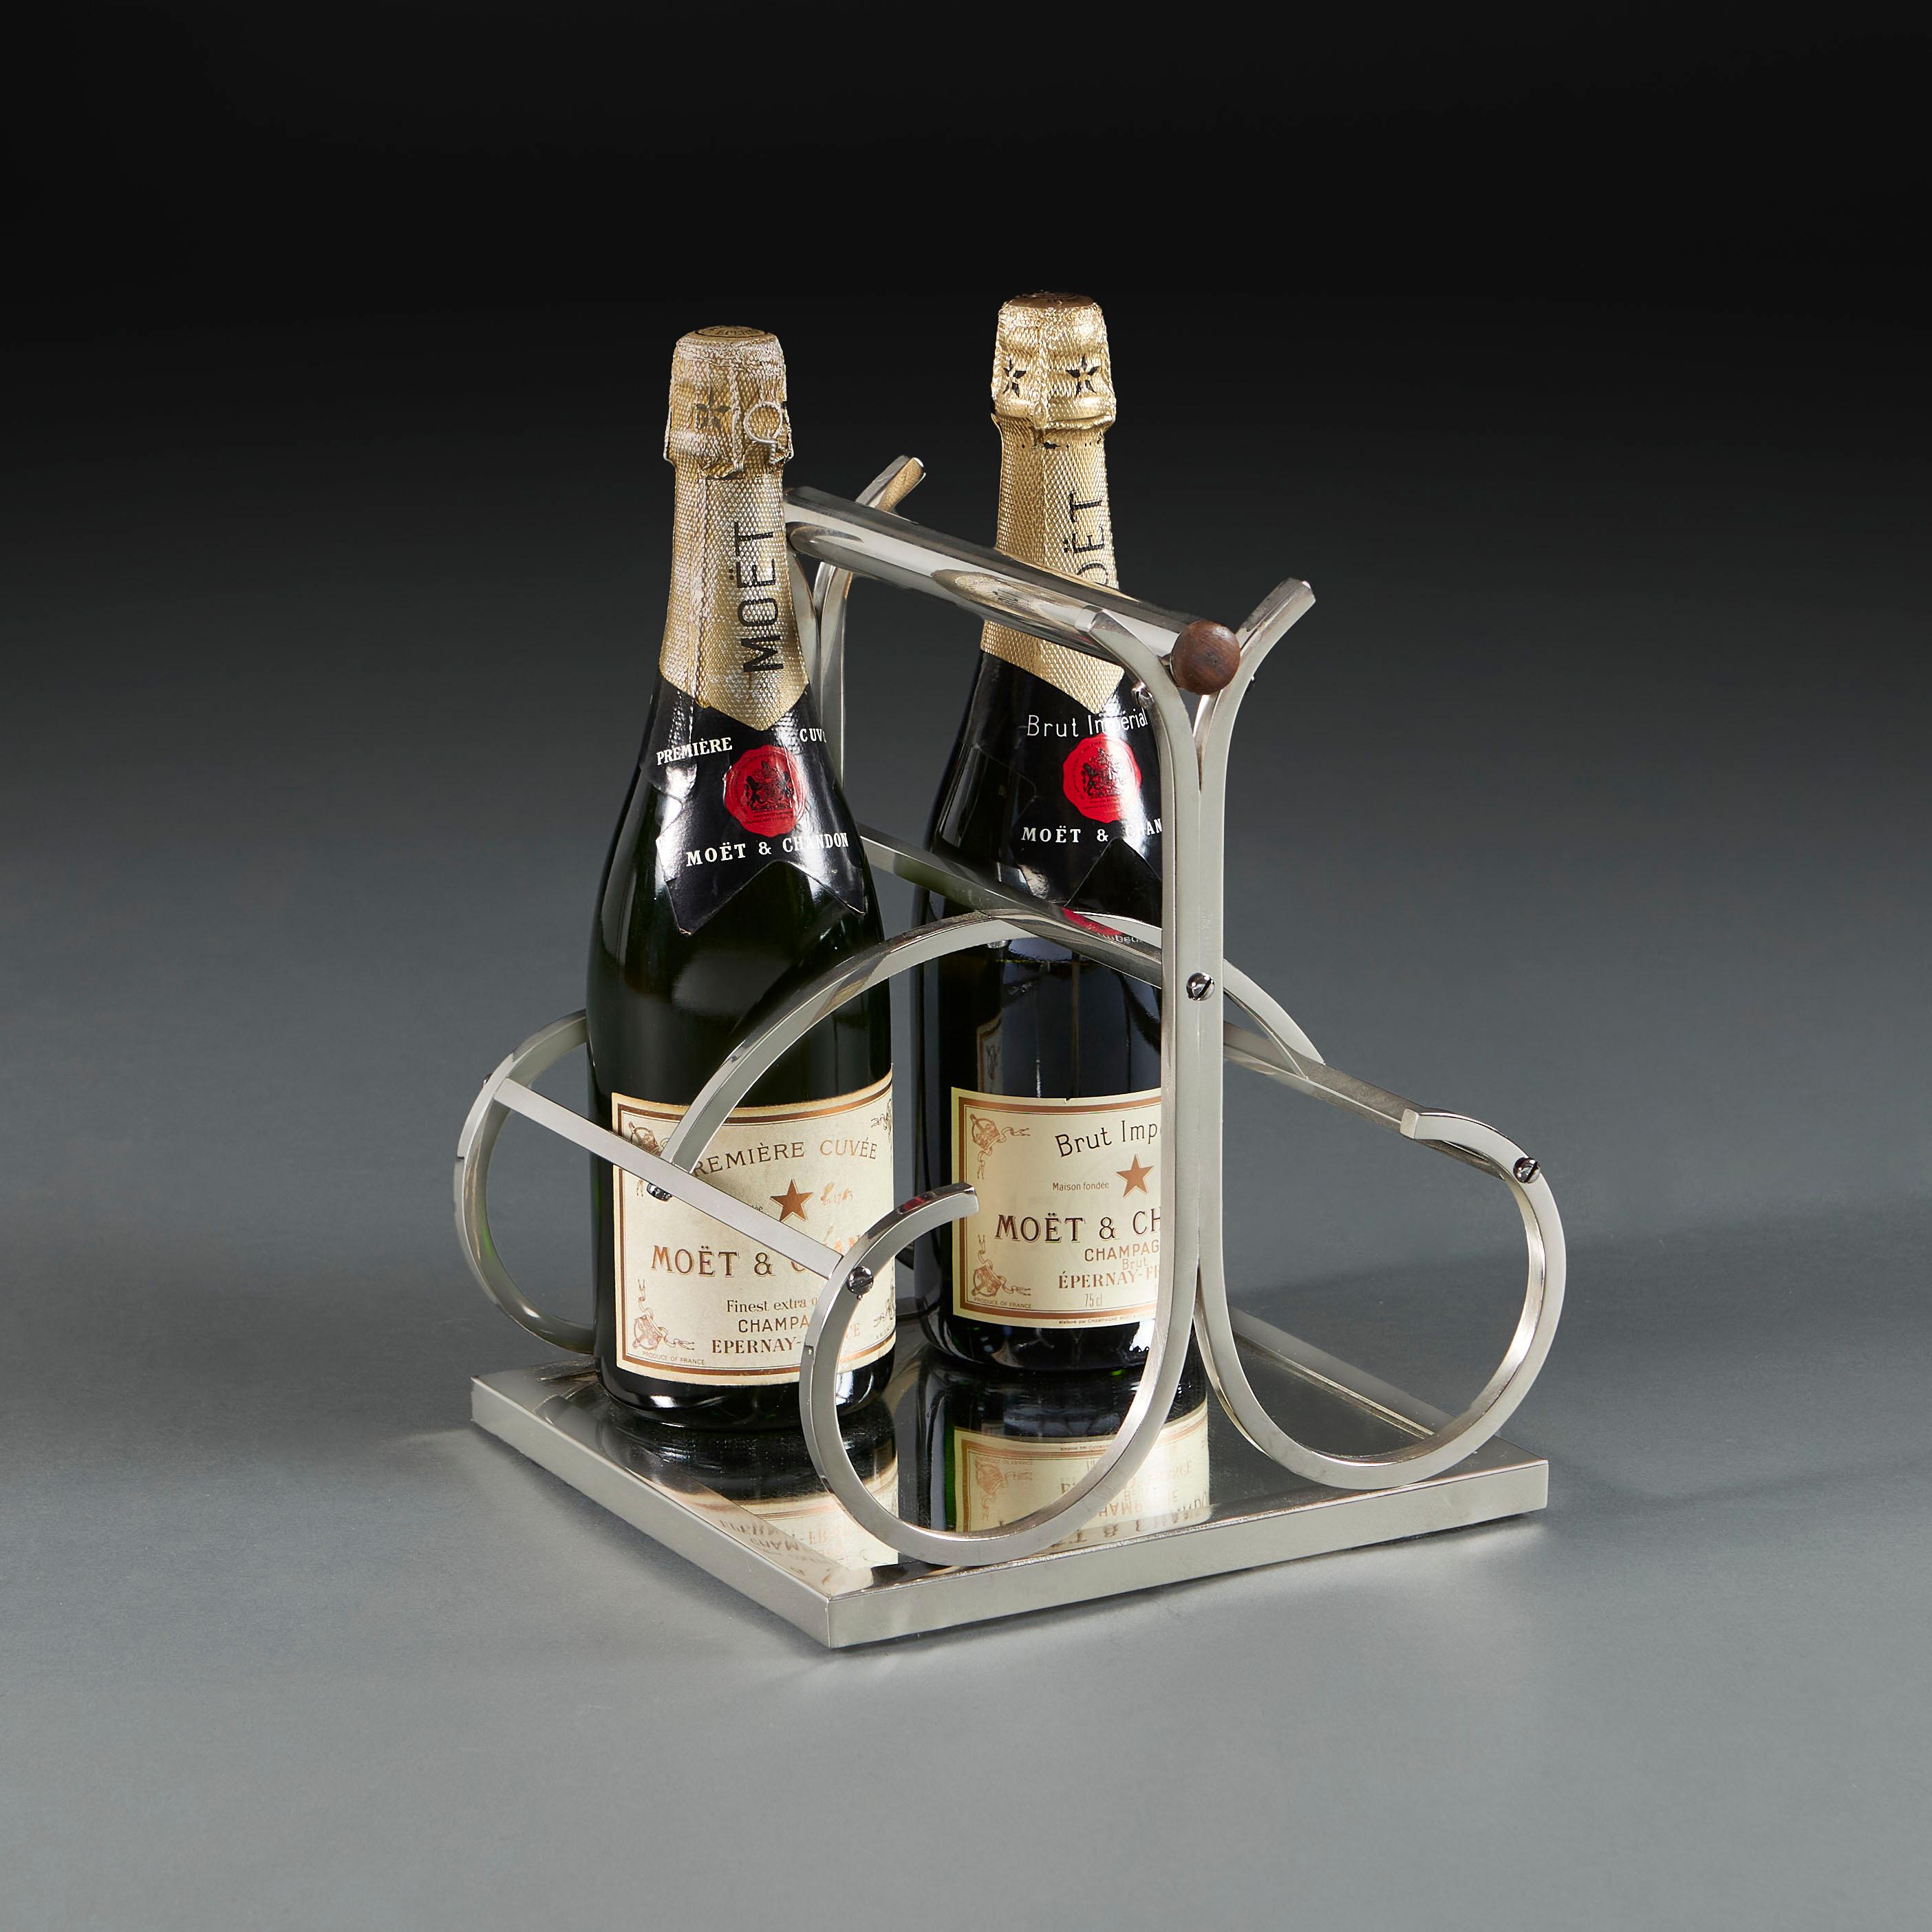 France, circa 1940

A wine bottle carrier by Jacques Adnet of sculptural form with curved polished steel arms and frame and the base inset with patinated glass, to hold four wine bottles.

Height 30.00cm

Width 23.00cm

Depth 23.00cm